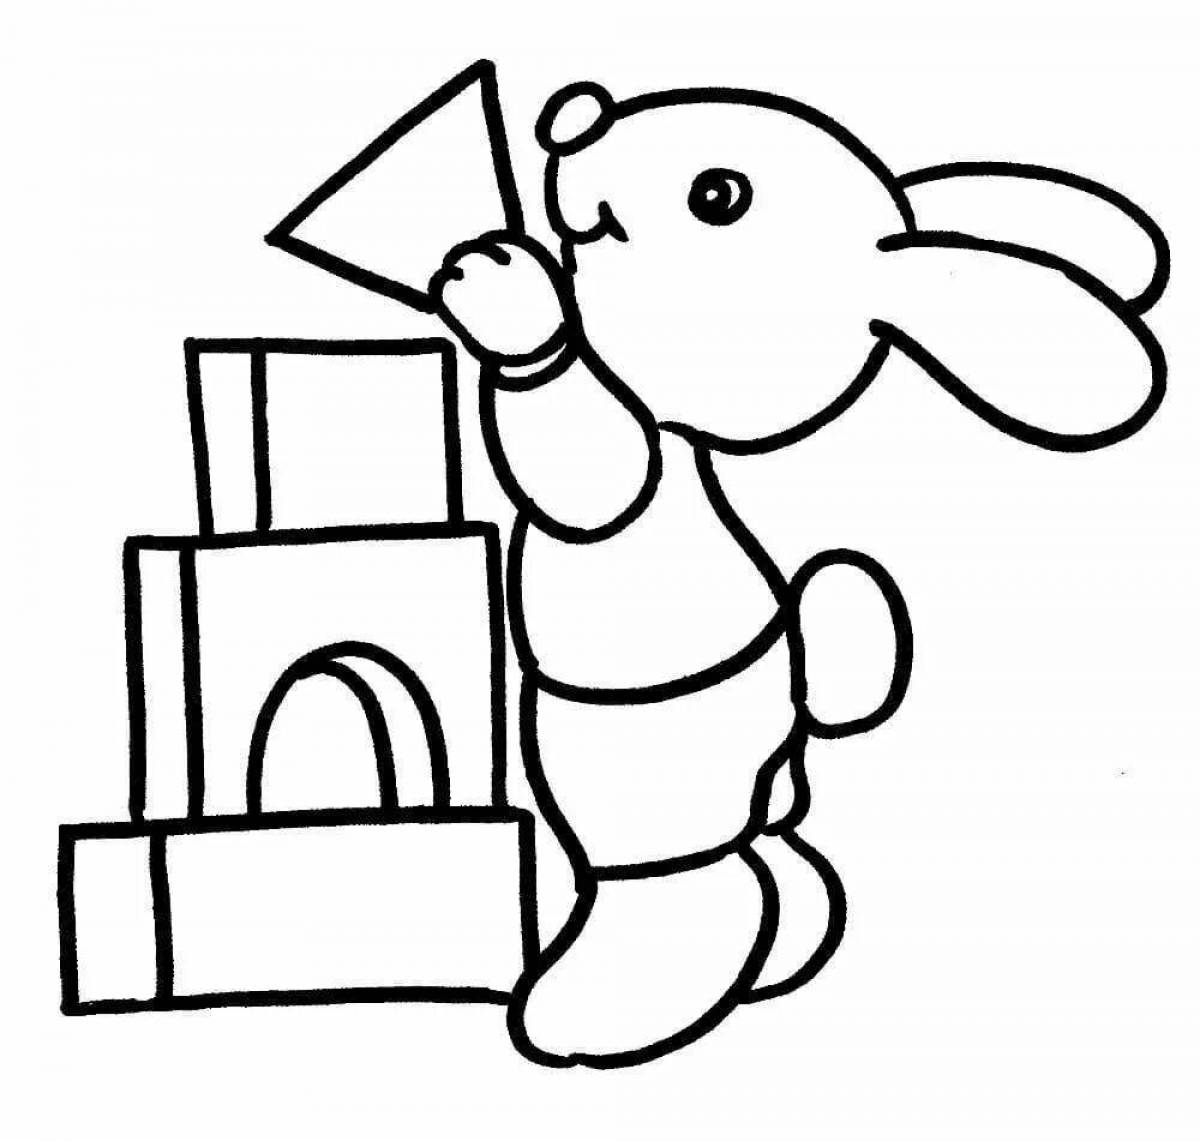 Archive of colorful preschool coloring pages